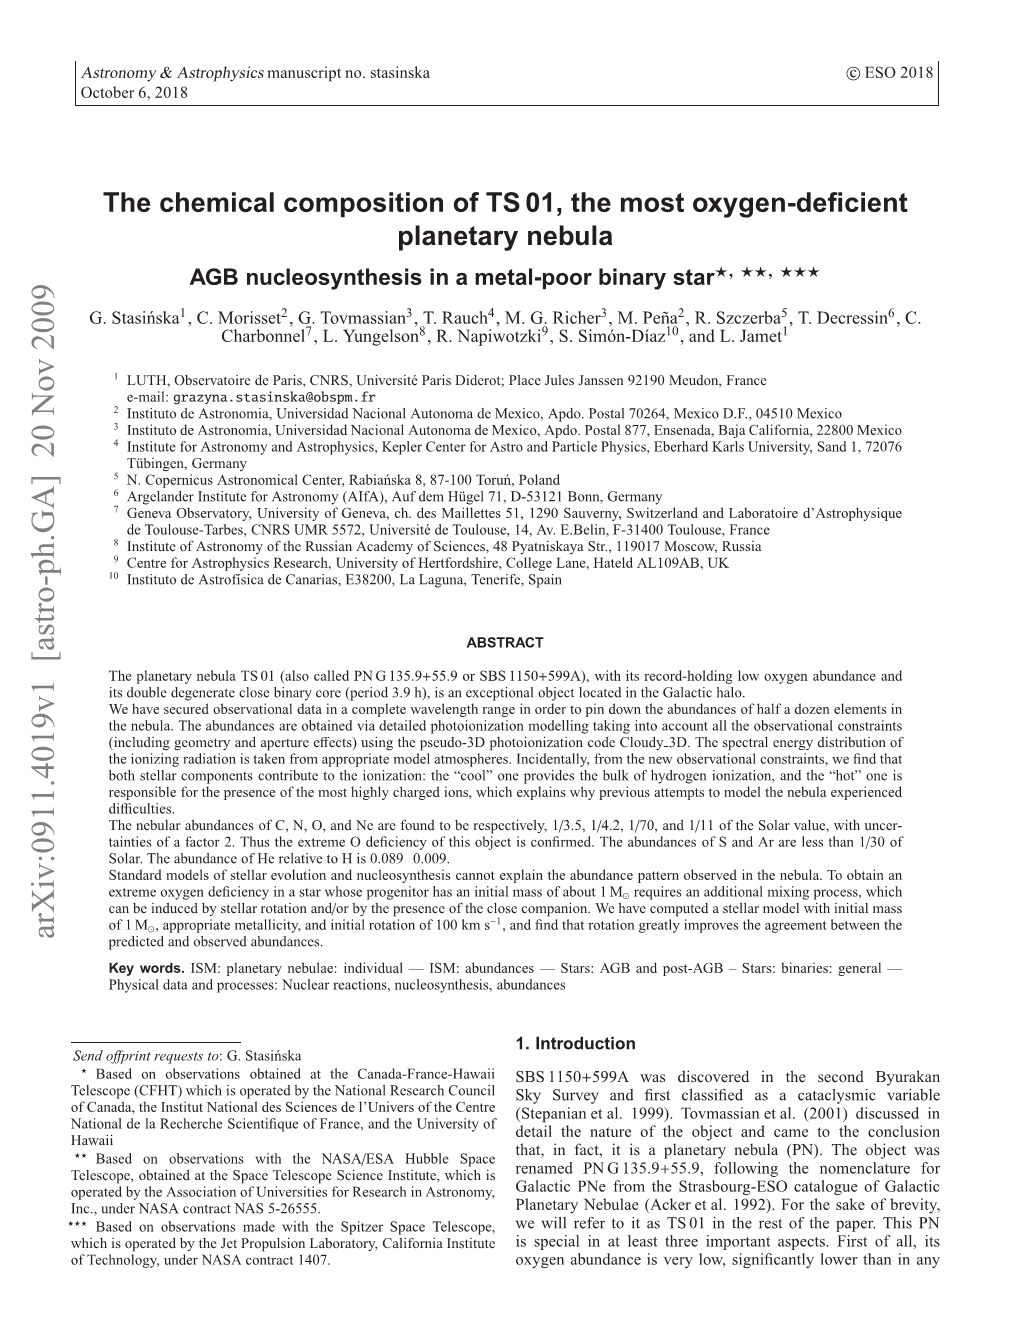 The Chemical Composition of TS 01, the Most Oxygen-Deficient Planetary